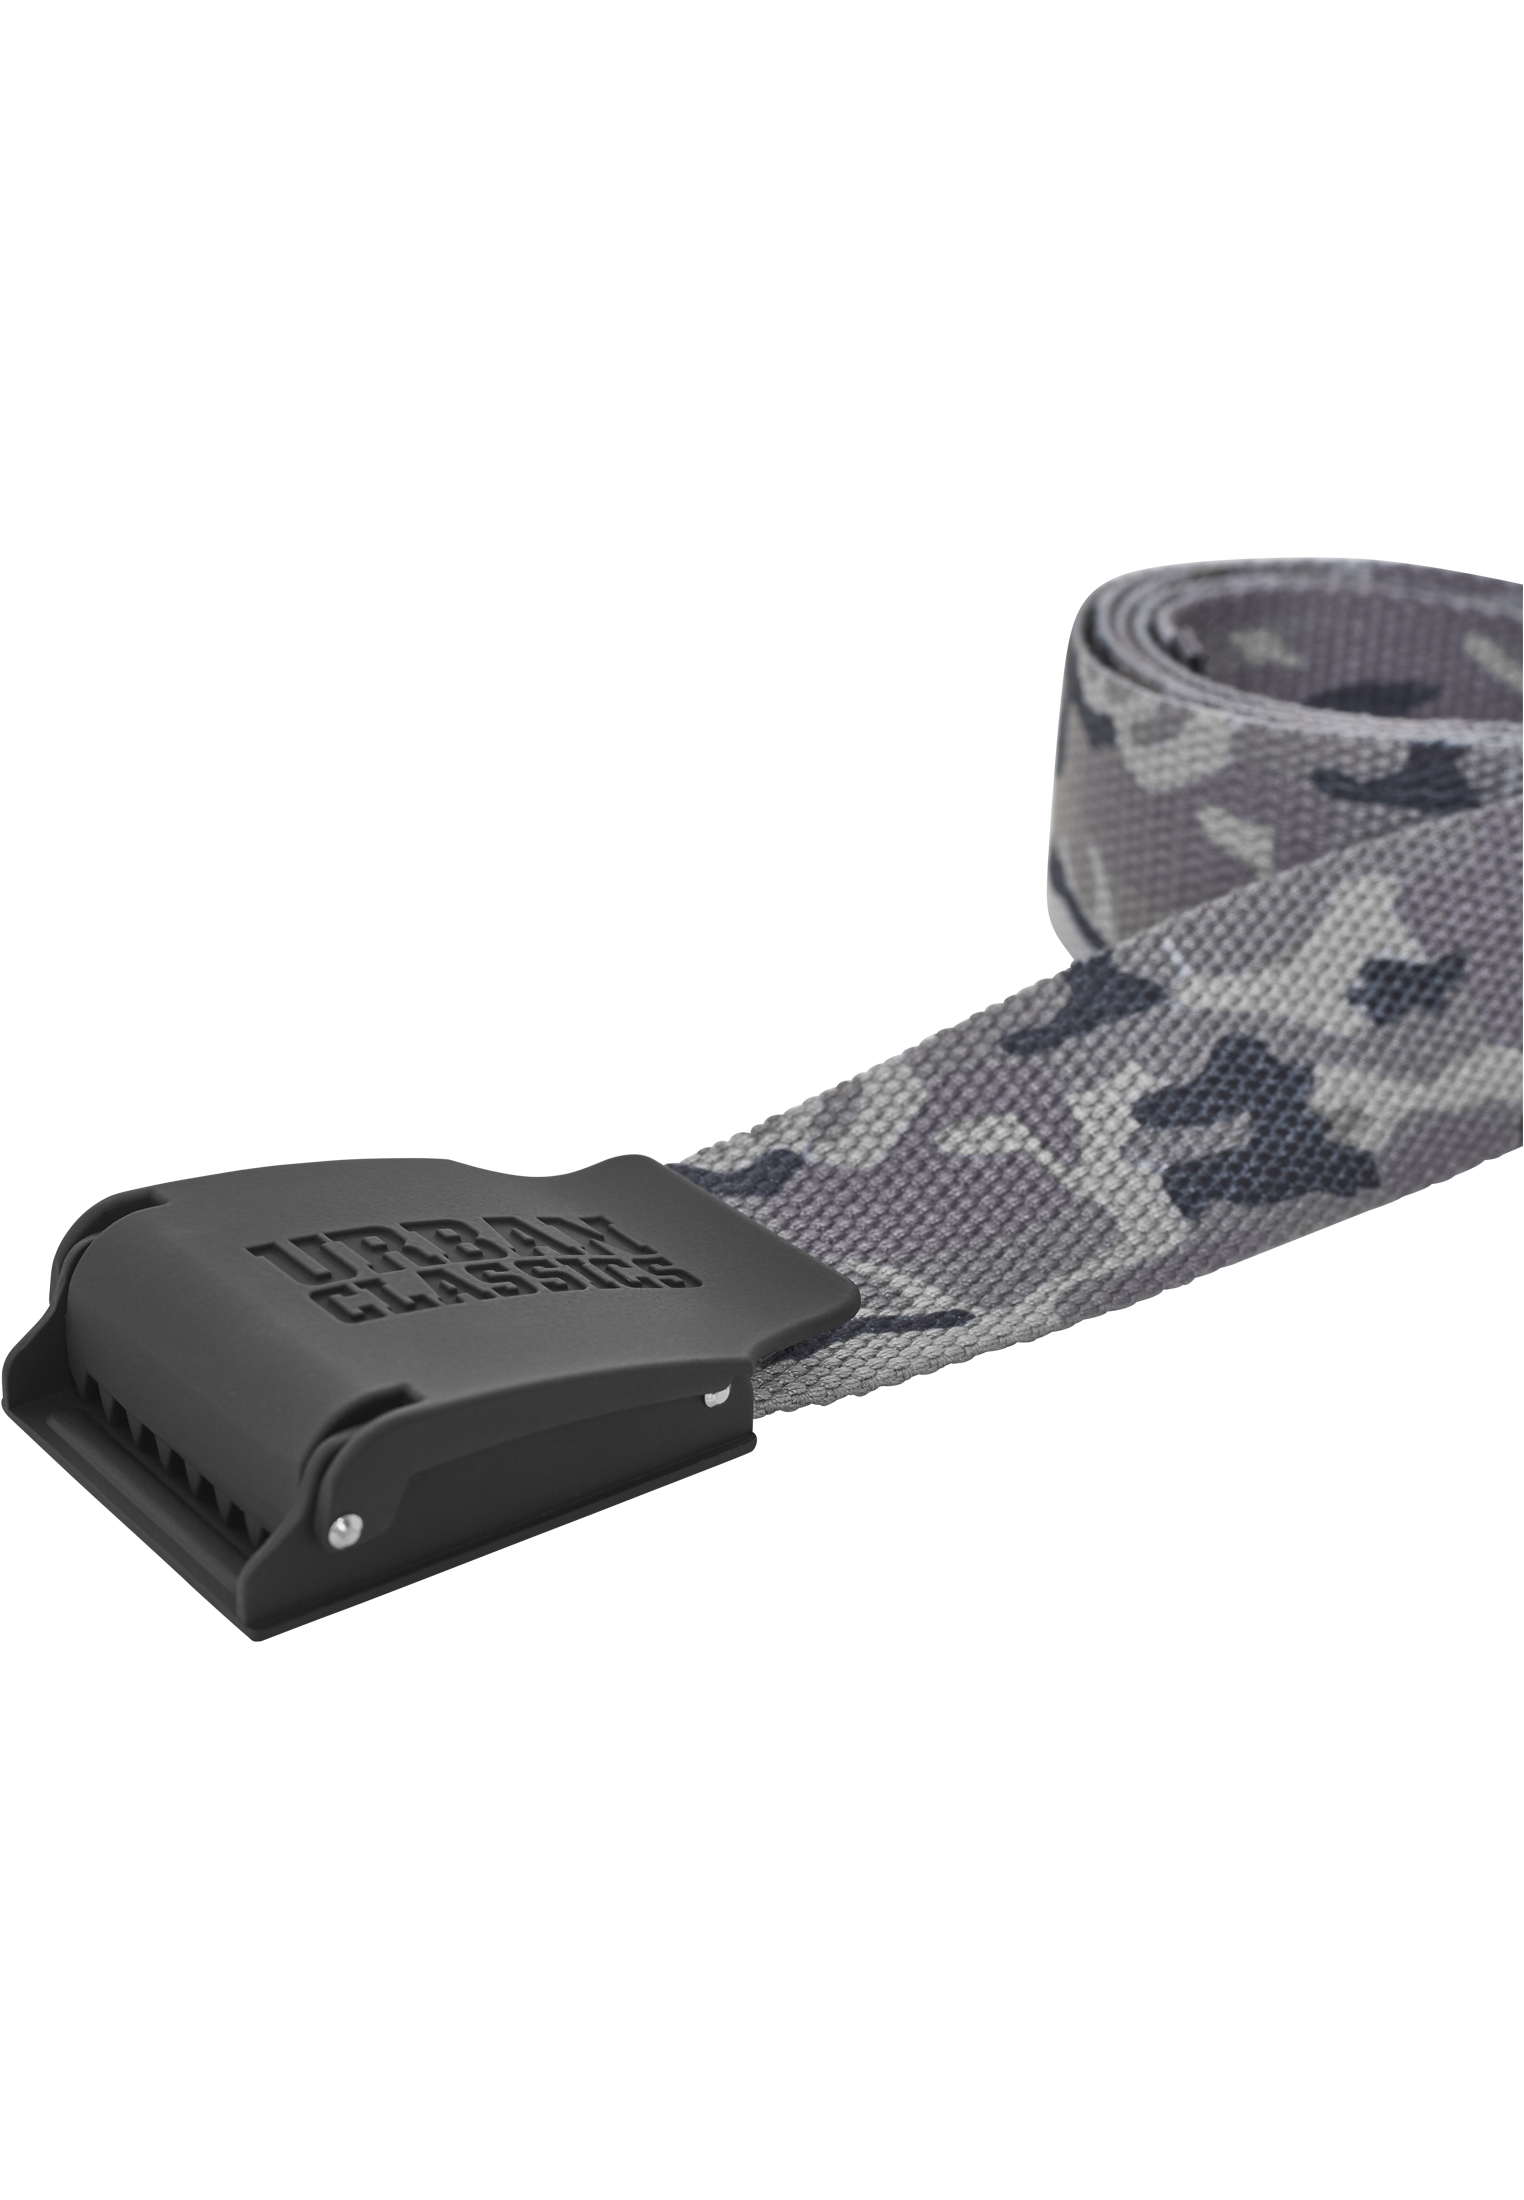 G?rtel Woven Belt Rubbered Touch UC in Farbe grey camo